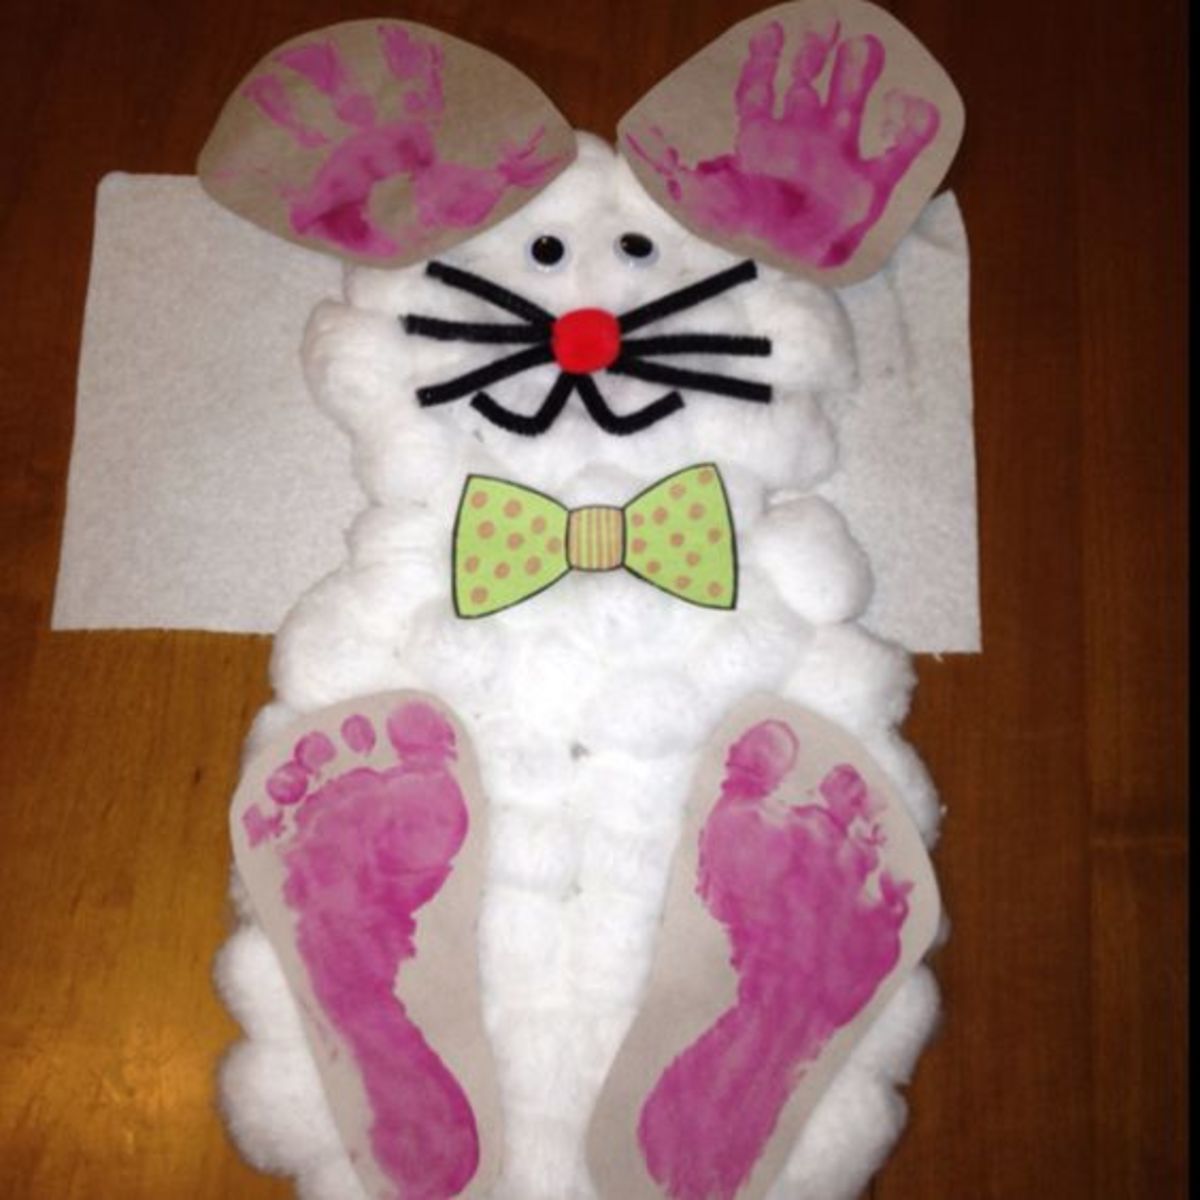 Easter bunny project for toddlers. Use cotton balls onto construction paper cut for bunny's body. Hands and feet with pink paint. Pipe cleaners for whiskers and mouth. Googly eyes and puff for nose. Tie for finishing touch.